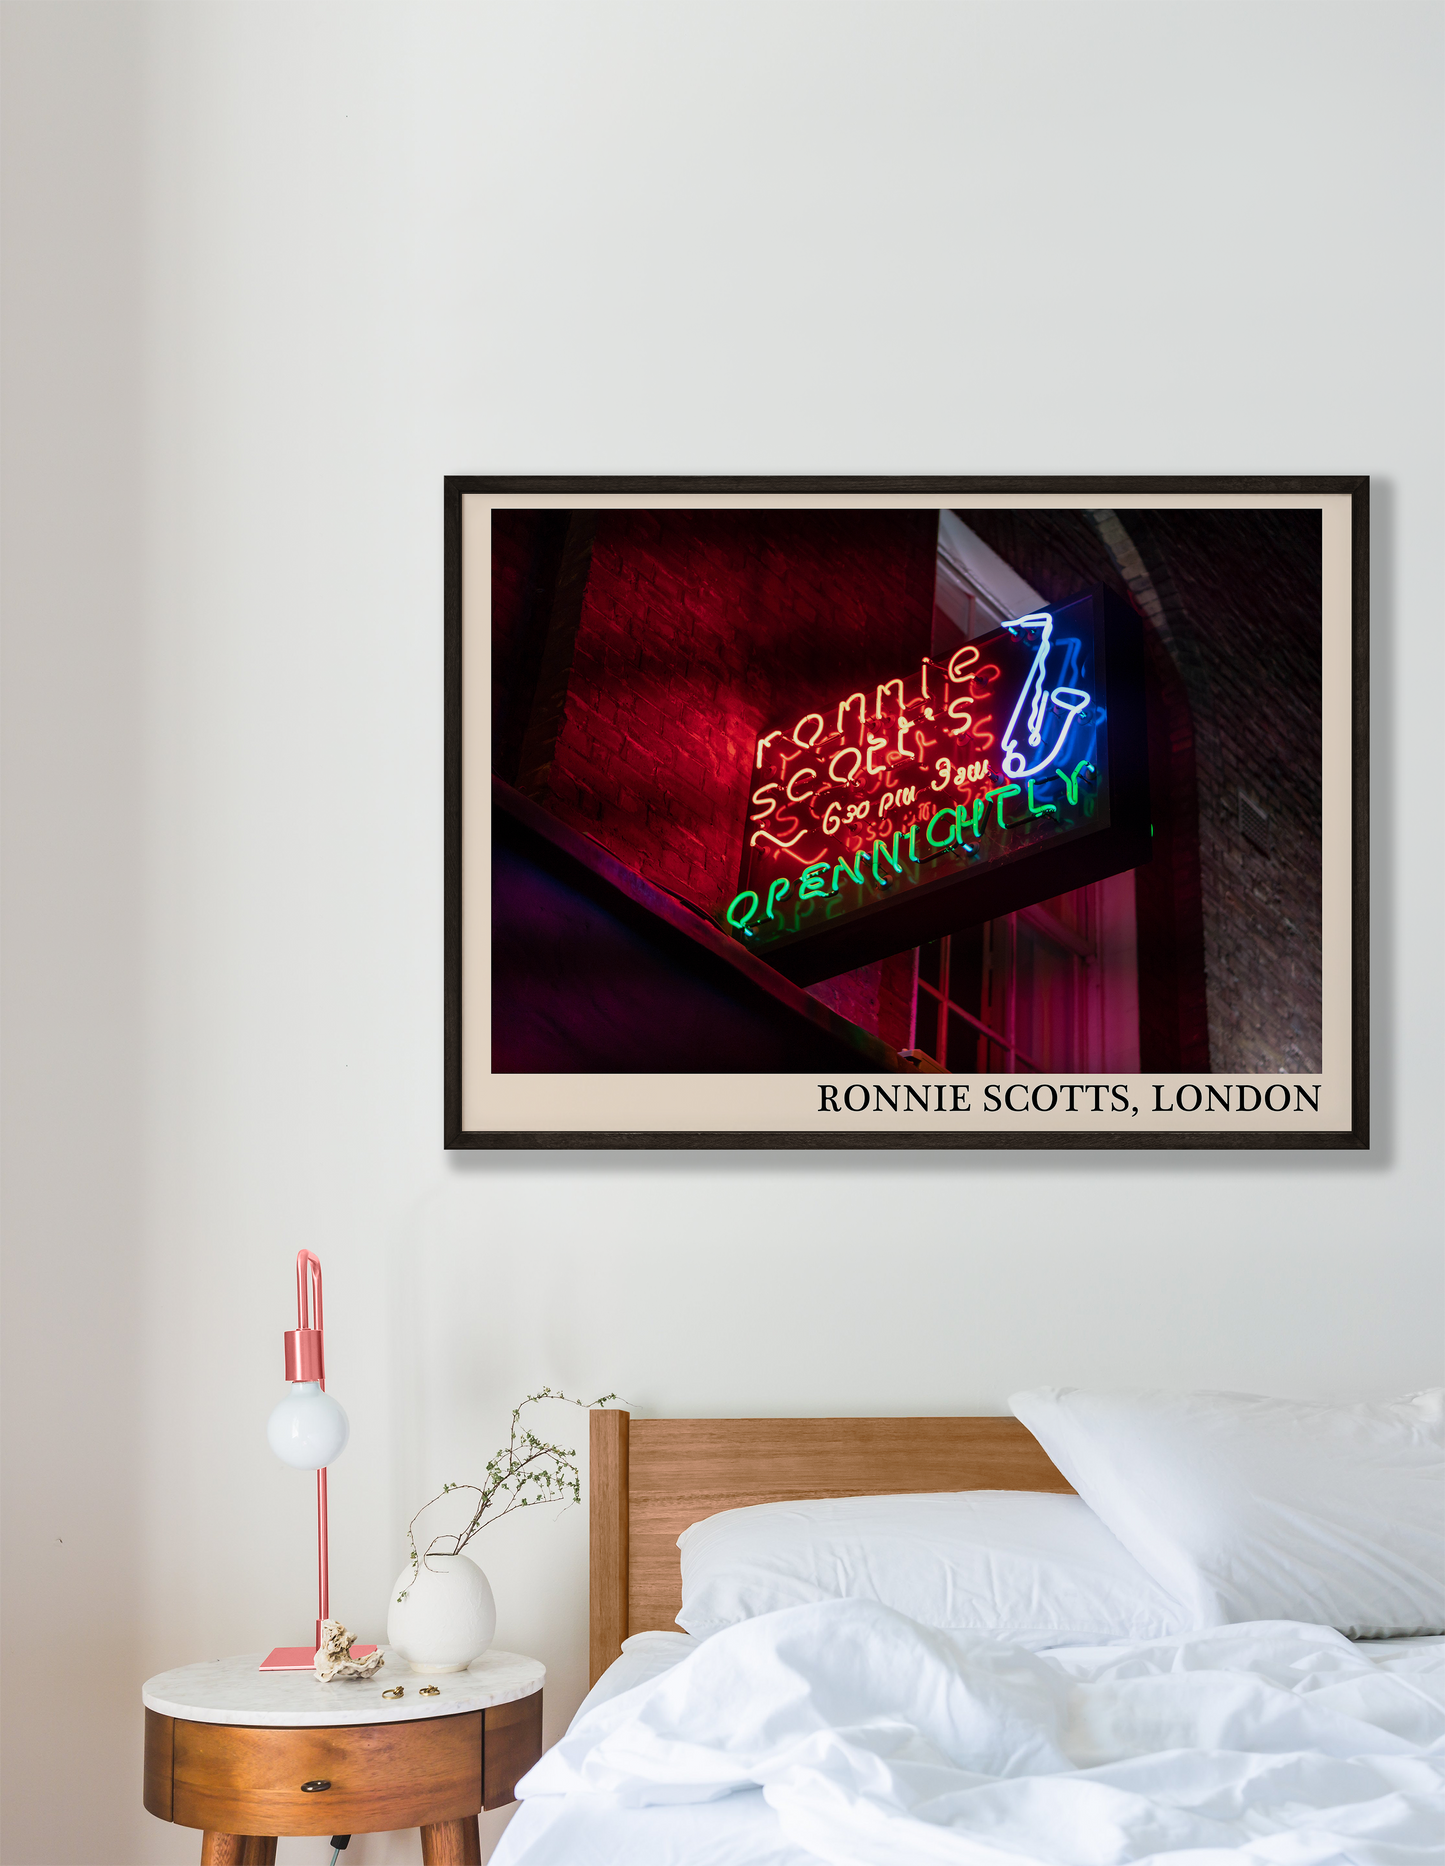 Iconic photo of Ronnie Scotts jazz club in London. Picture crafted into a cool black framed jazz print, with an off-white border. Poster is hanging on a grey bedroom wall